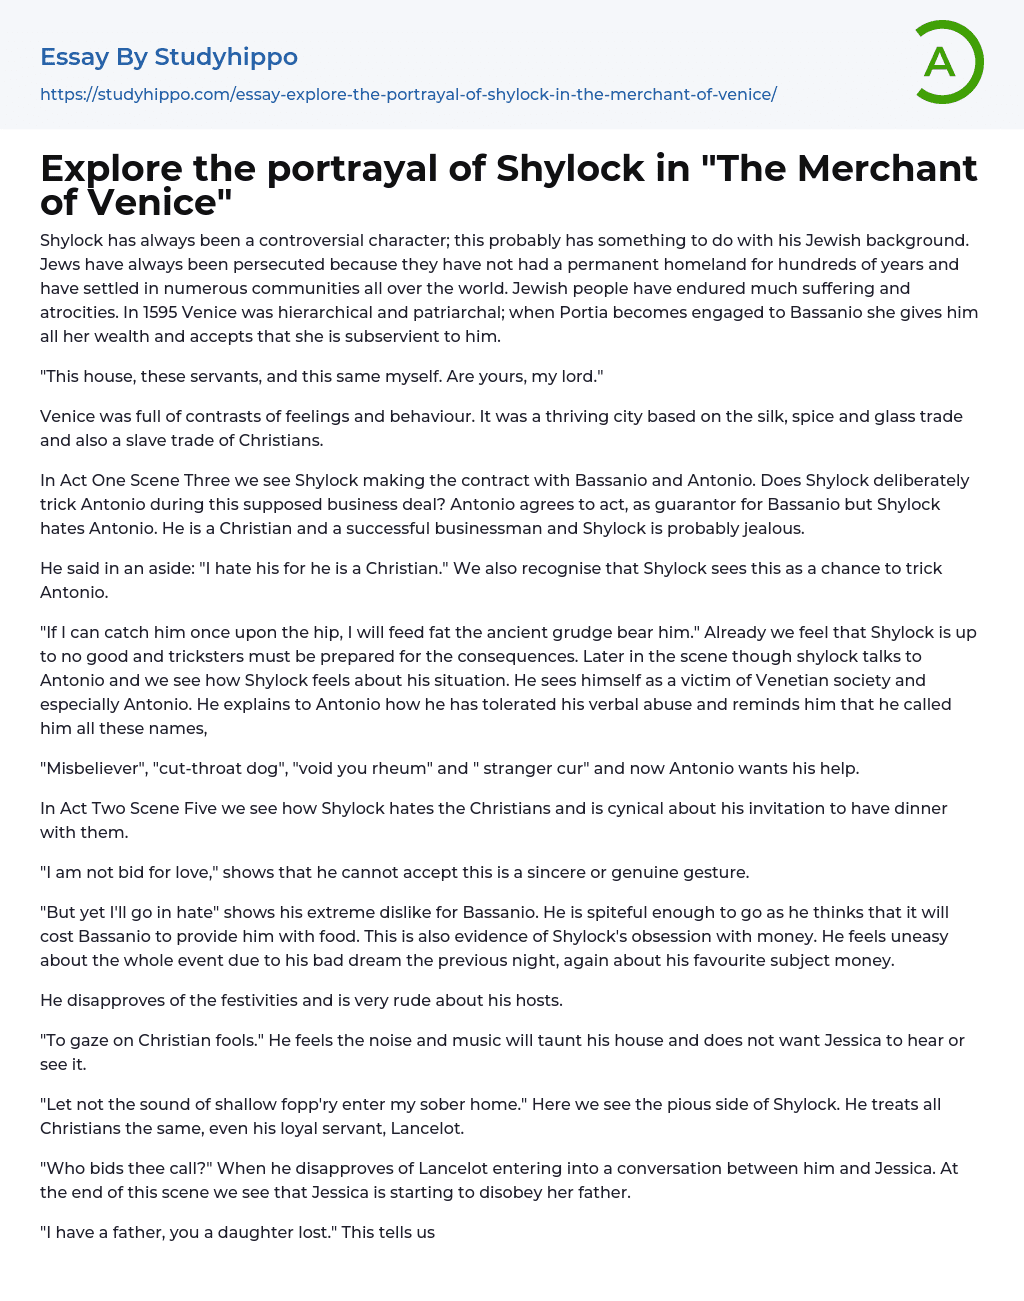 Explore the portrayal of Shylock in “The Merchant of Venice” Essay Example